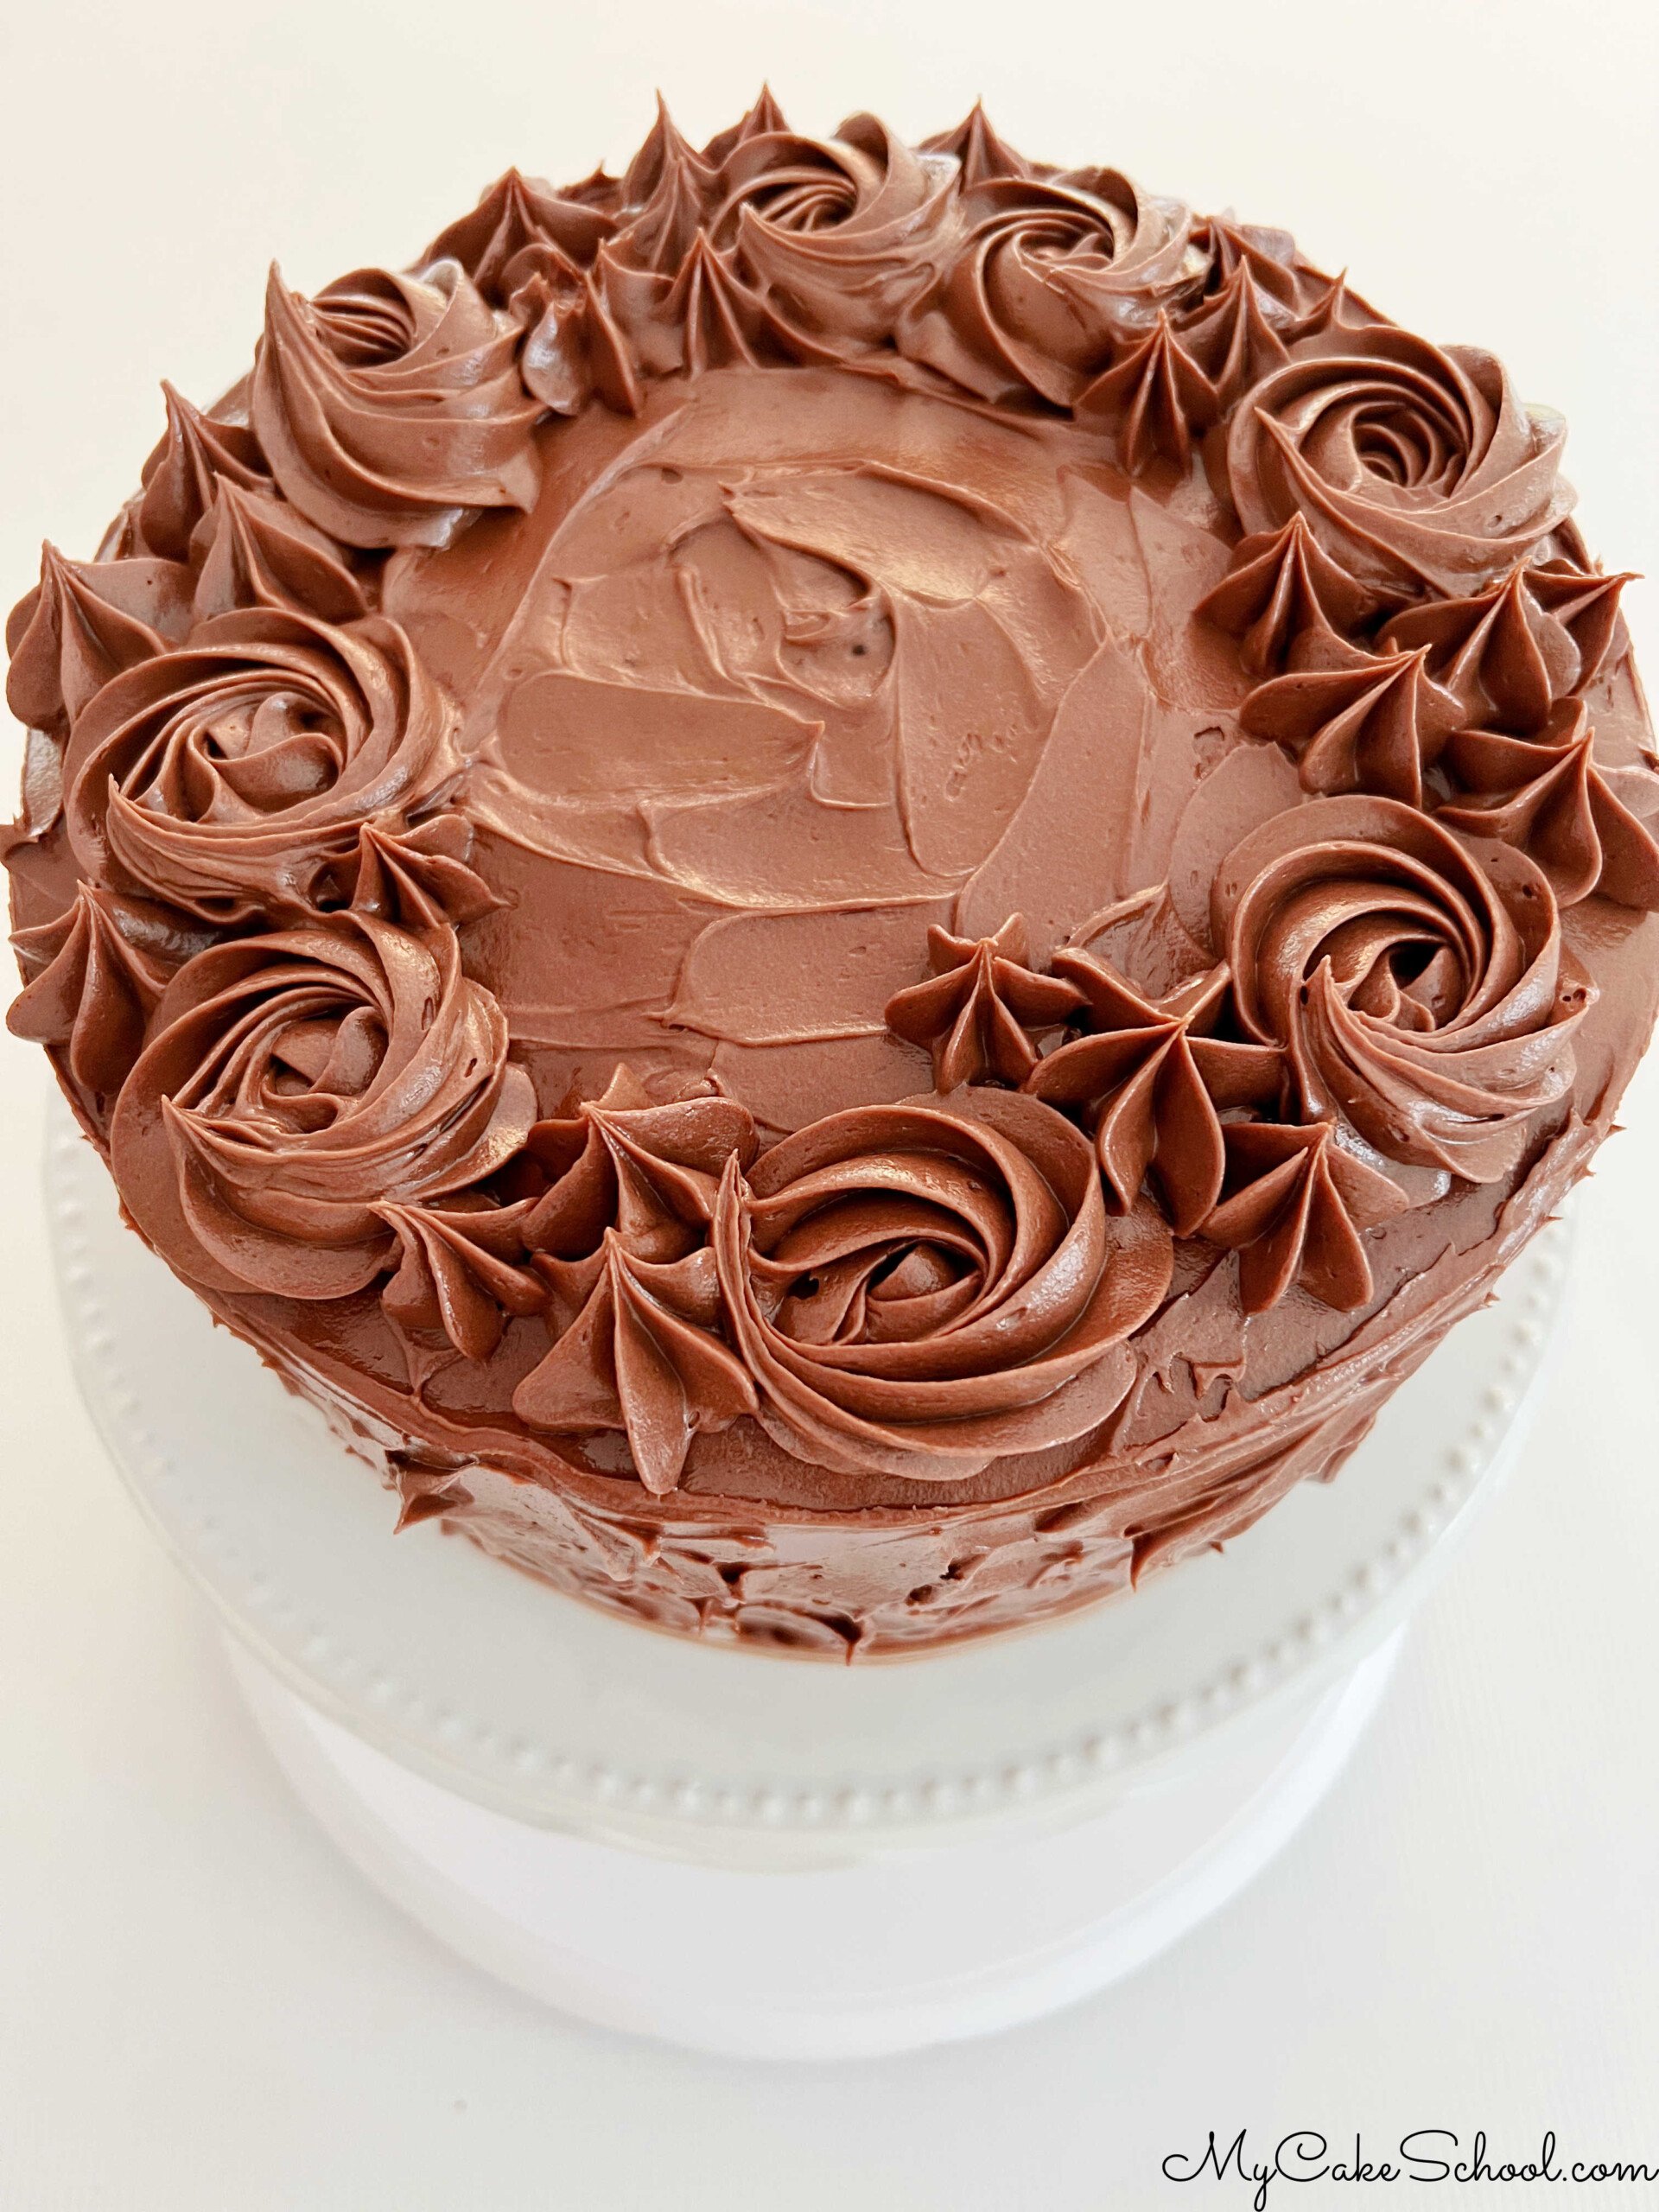 Top view of decorated Chocolate Mousse Cake.